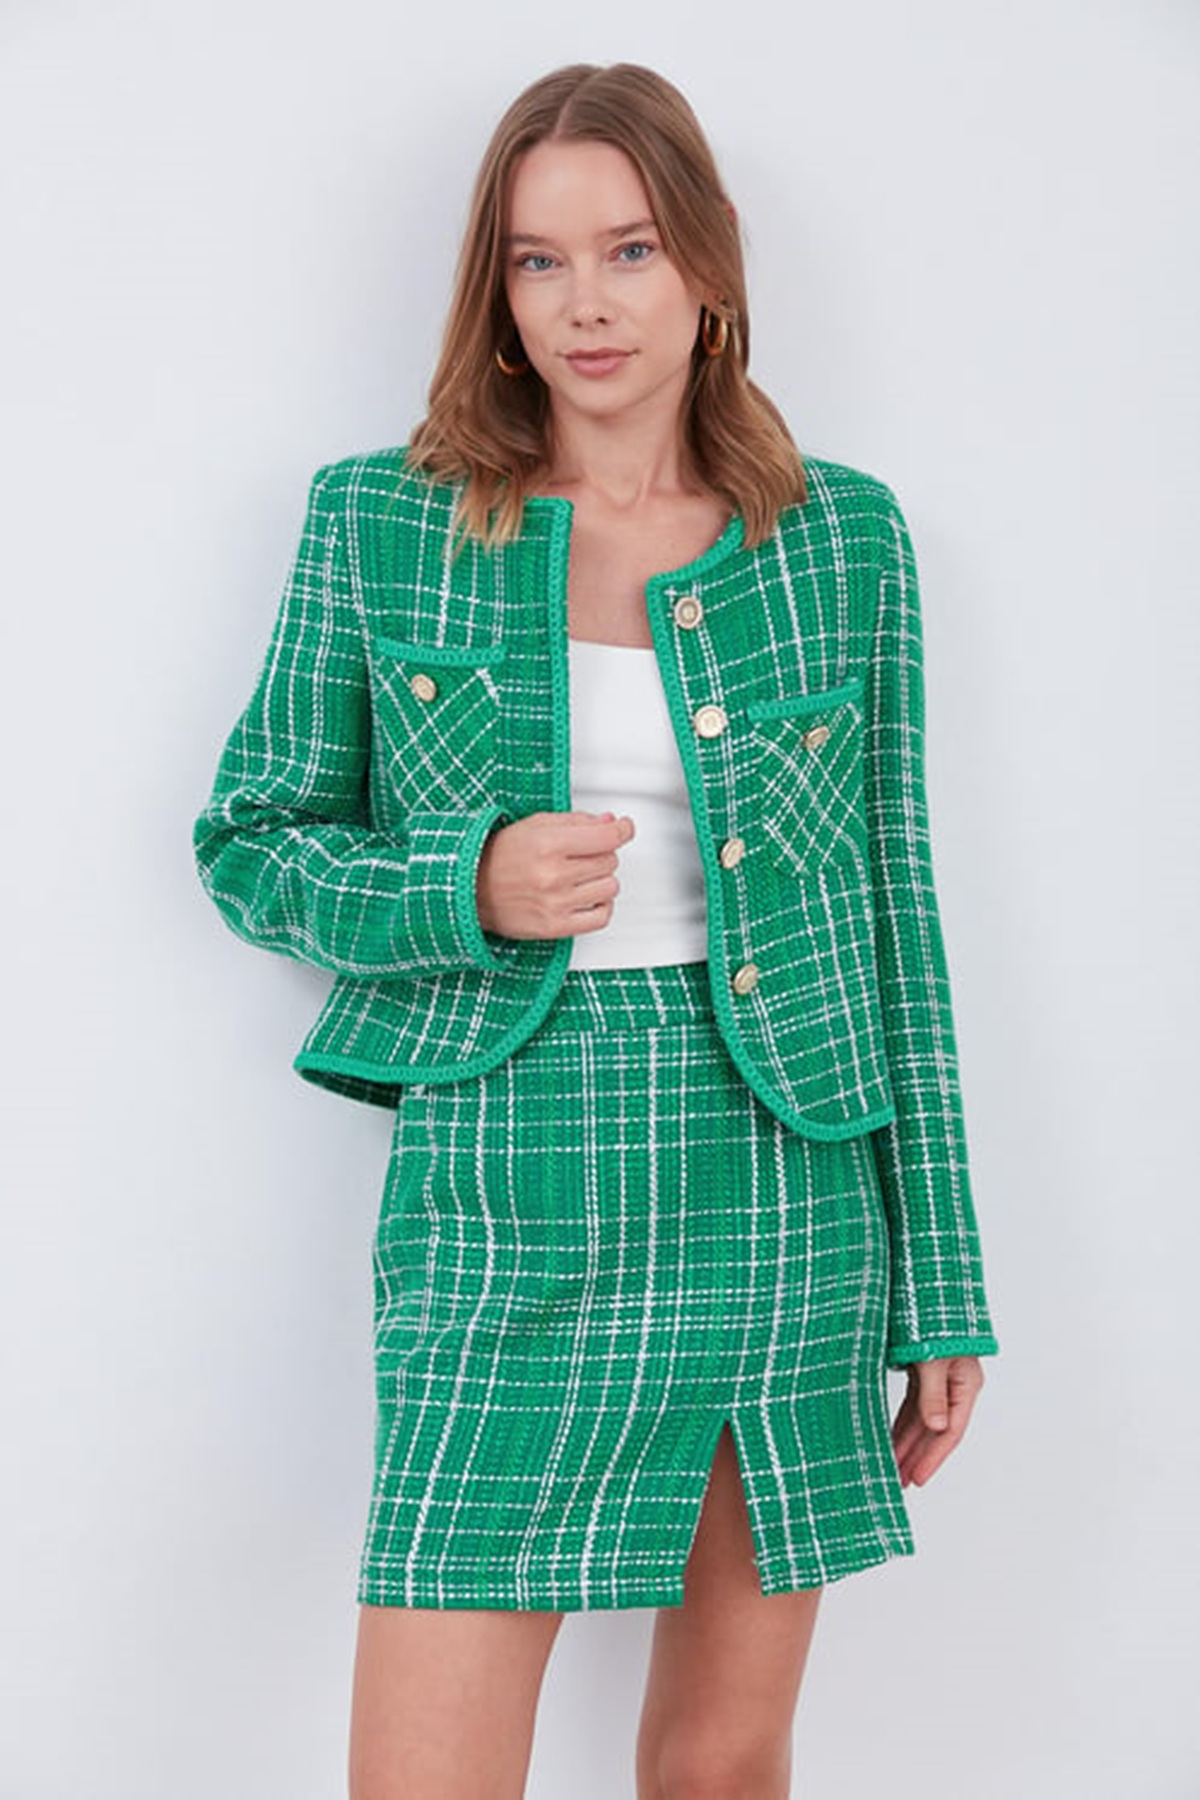 Laluvia Green Striped Skirt Jacket Tuvid Suit